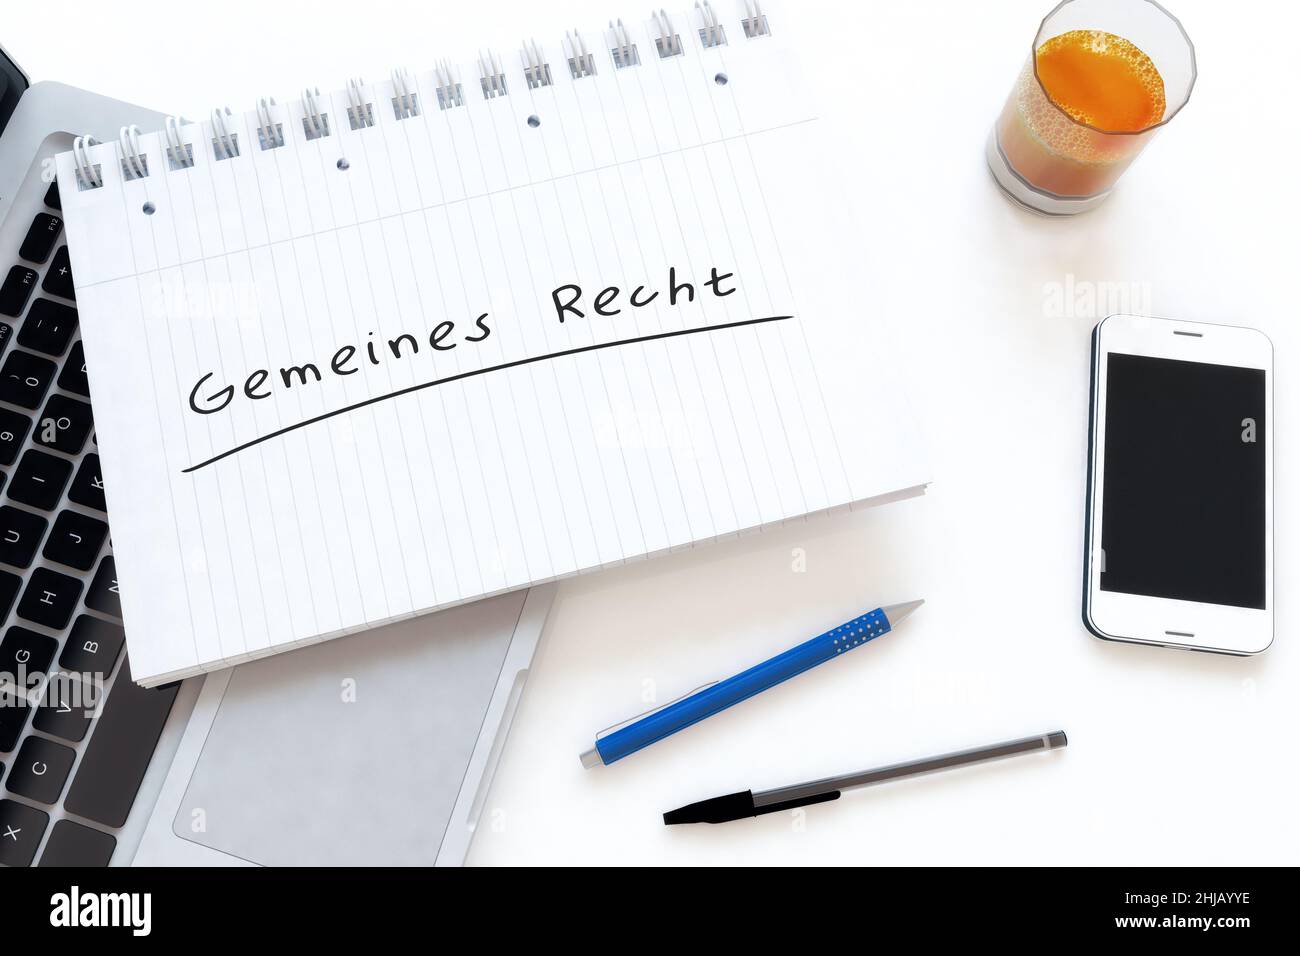 Gemeines Recht - german word for common right - handwritten text in a notebook on a desk - 3d render illustration. Stock Photo